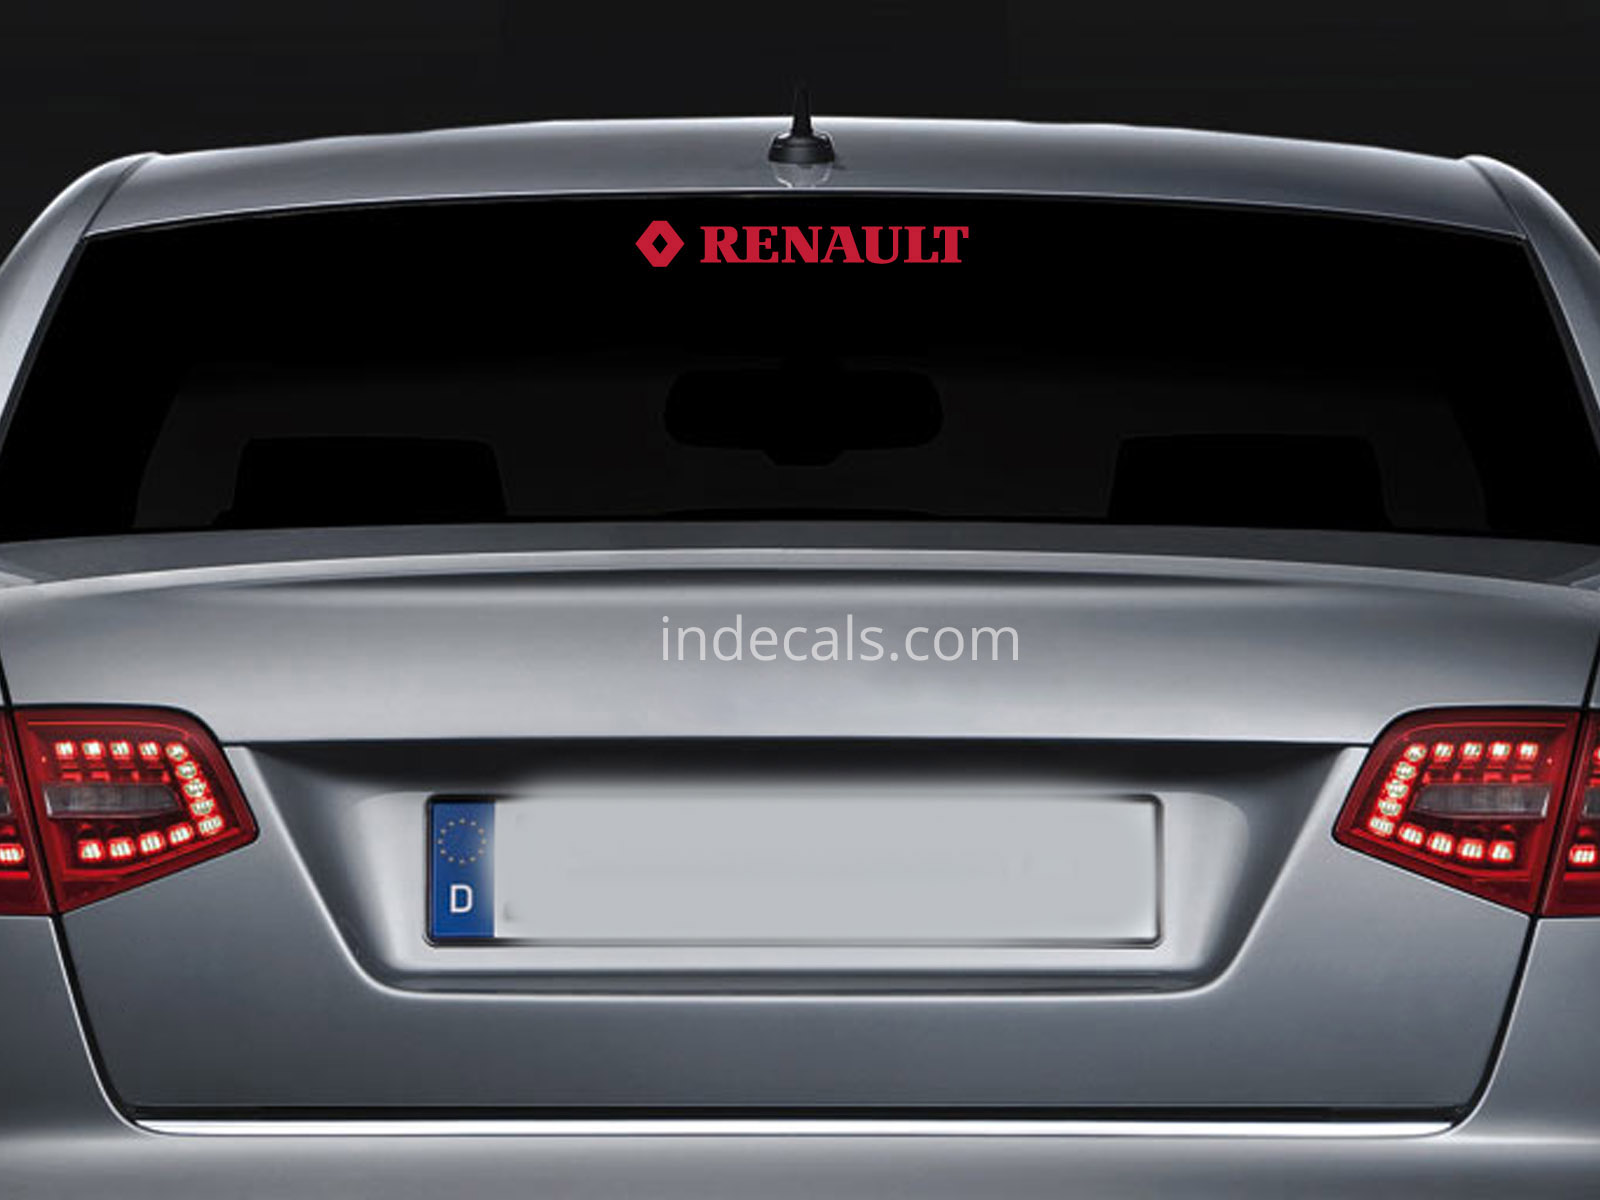 1 x Renault Sticker for Windshield or Back Window - Red